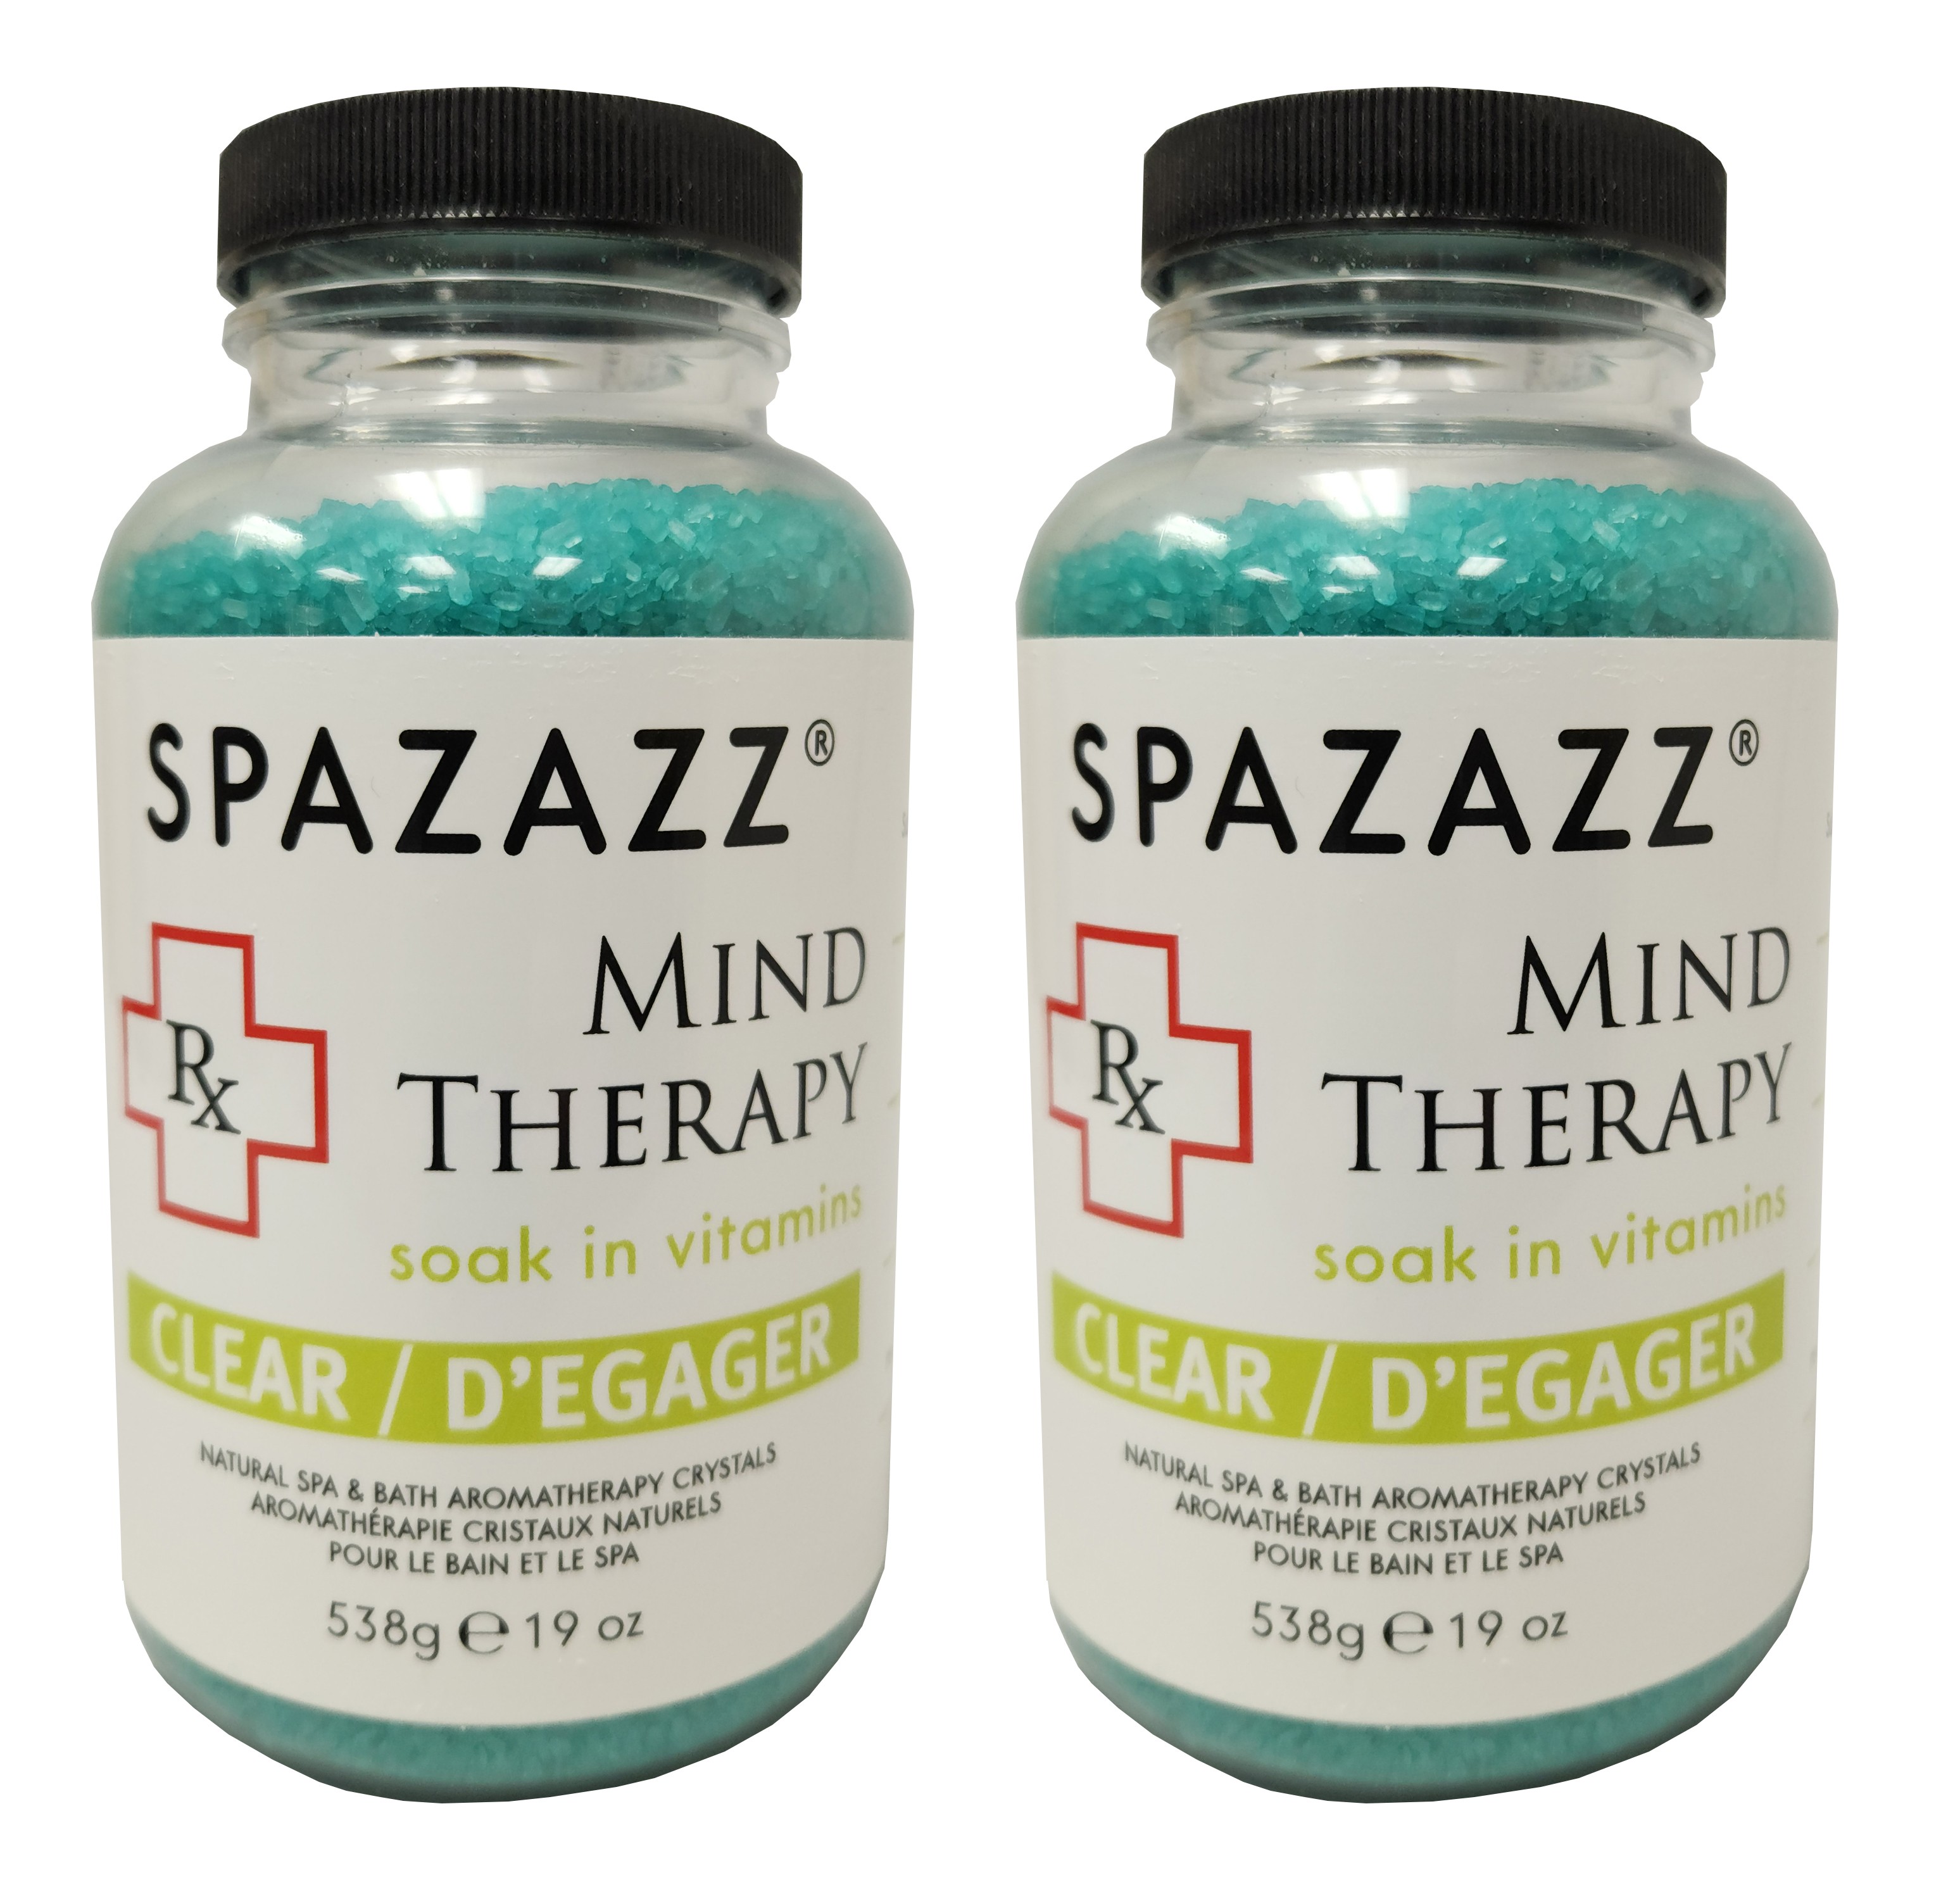 Spazazz Aromatherapy Spa and Bath Crystals - Mind Therapy 19oz (2 Pack)